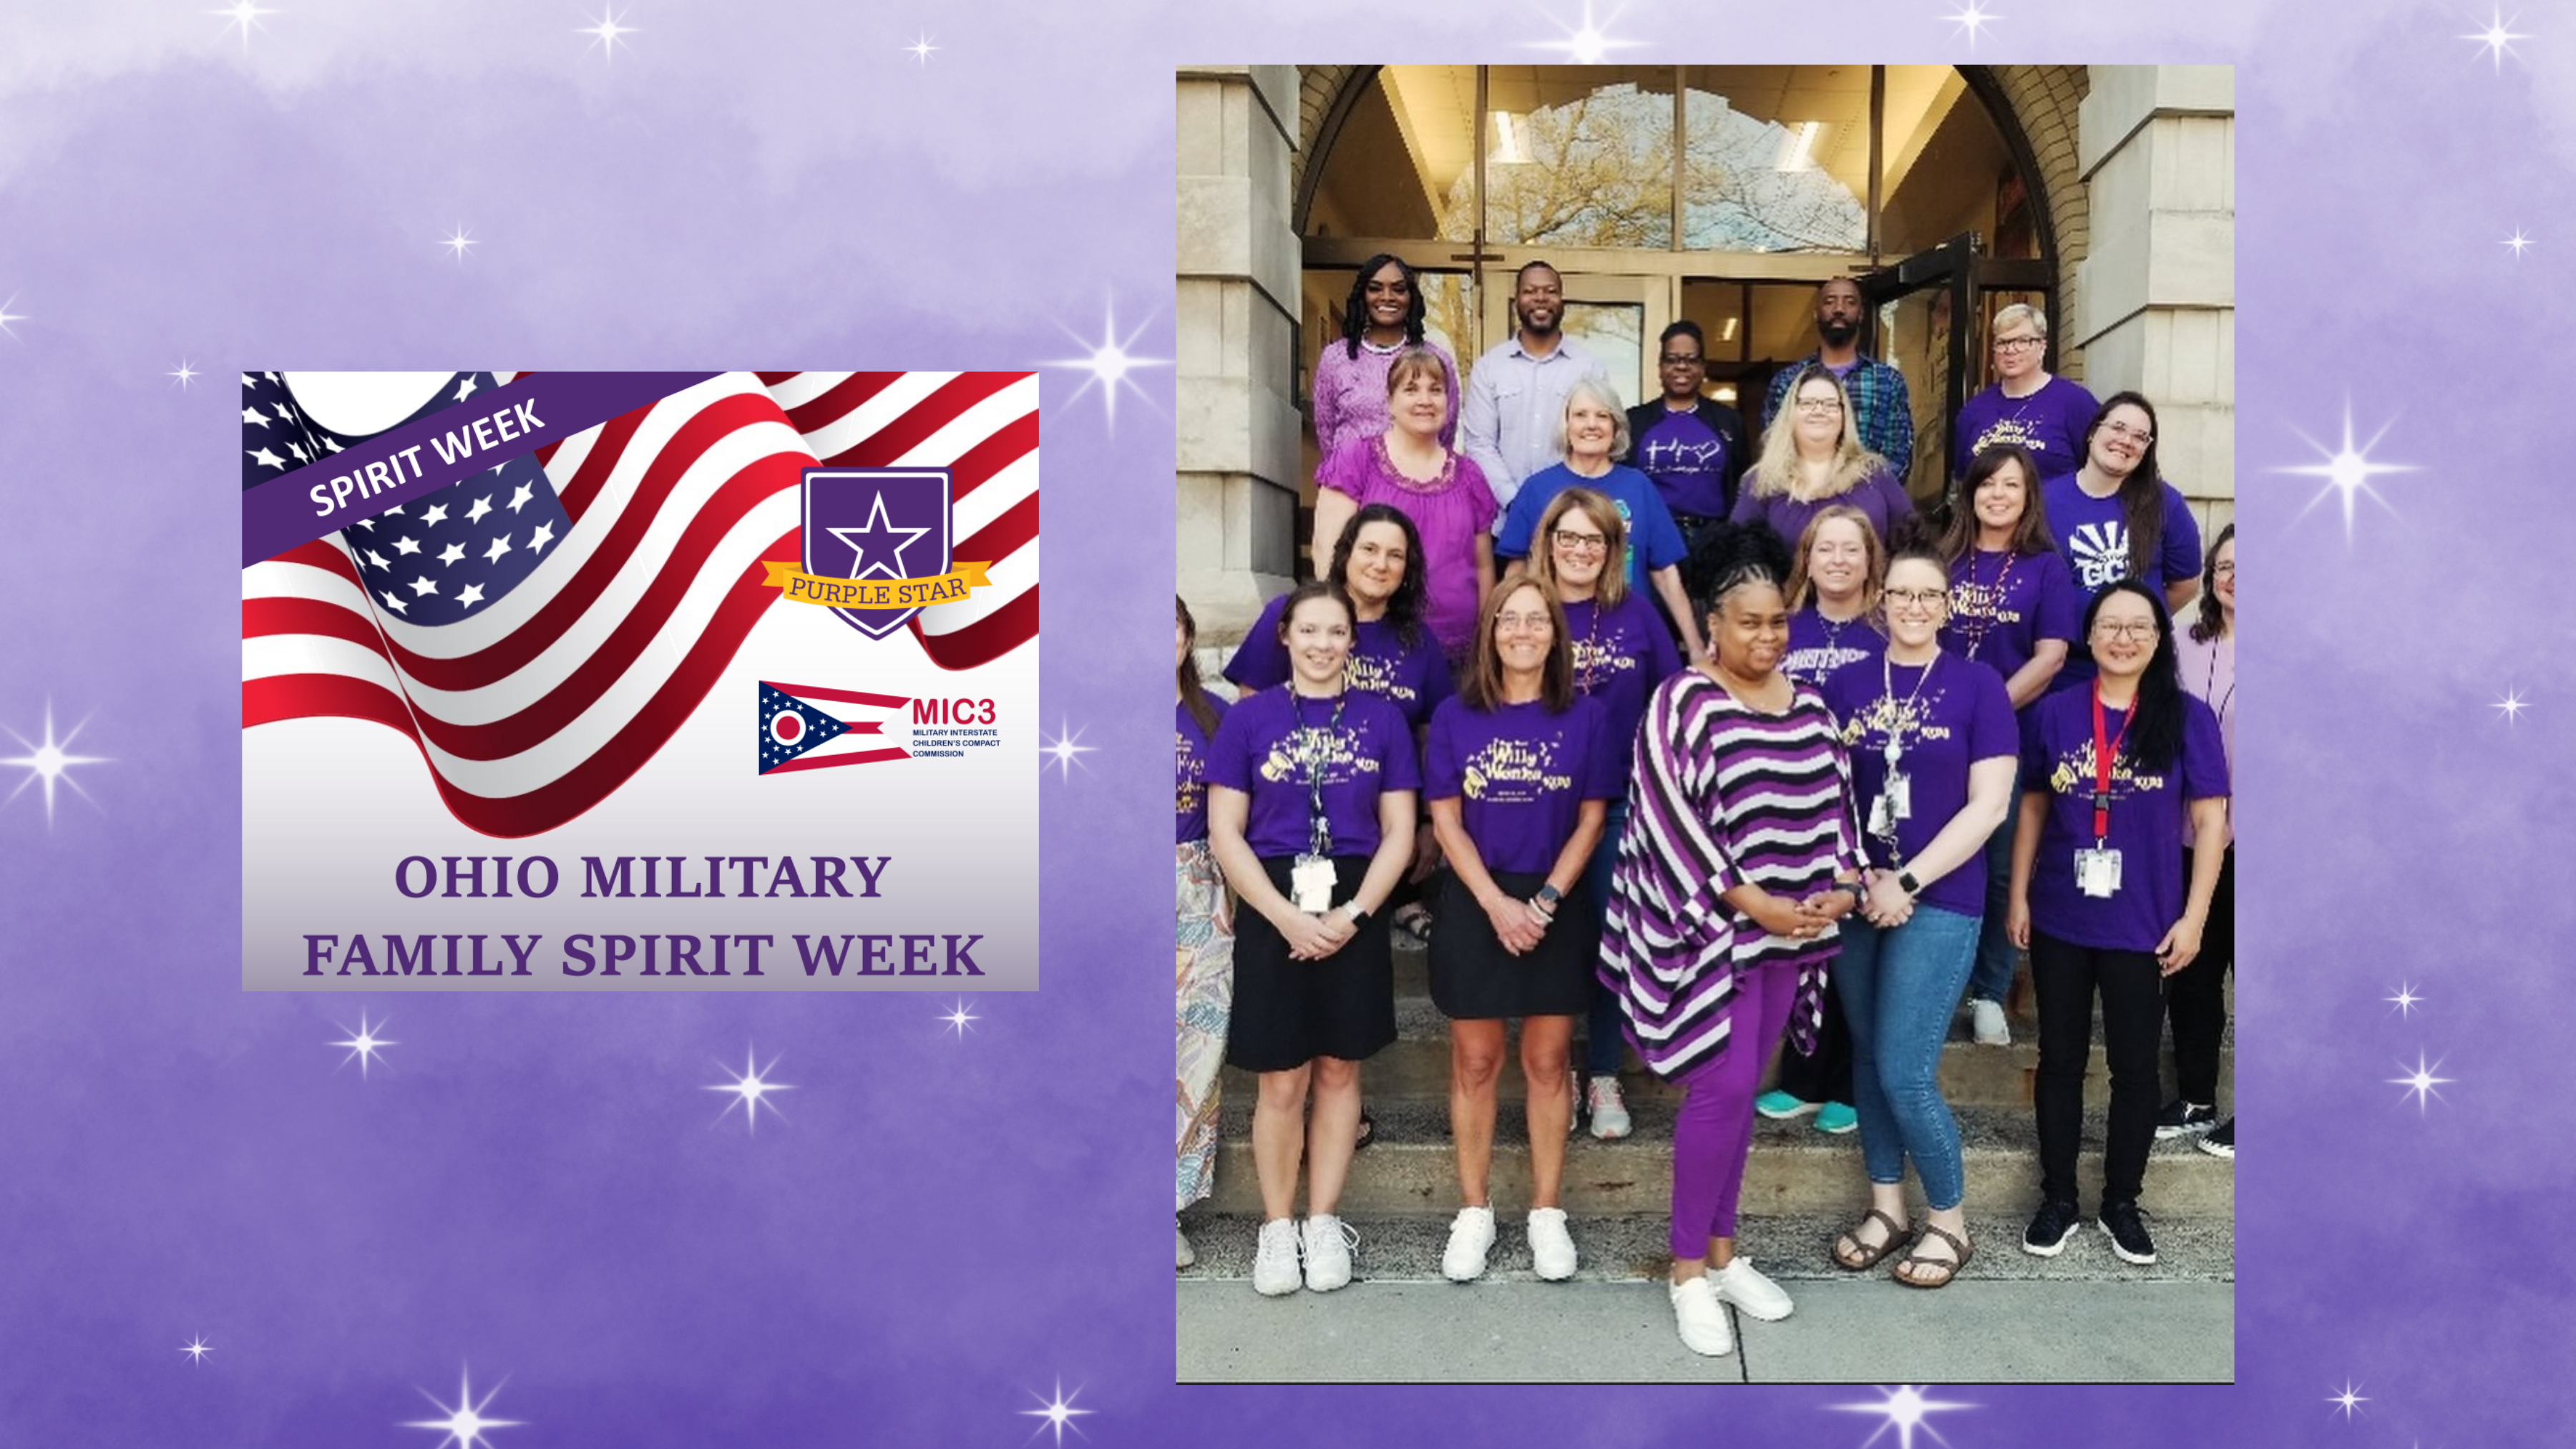 Glendale staff dressed in purple for OH Military Family Spirit Week